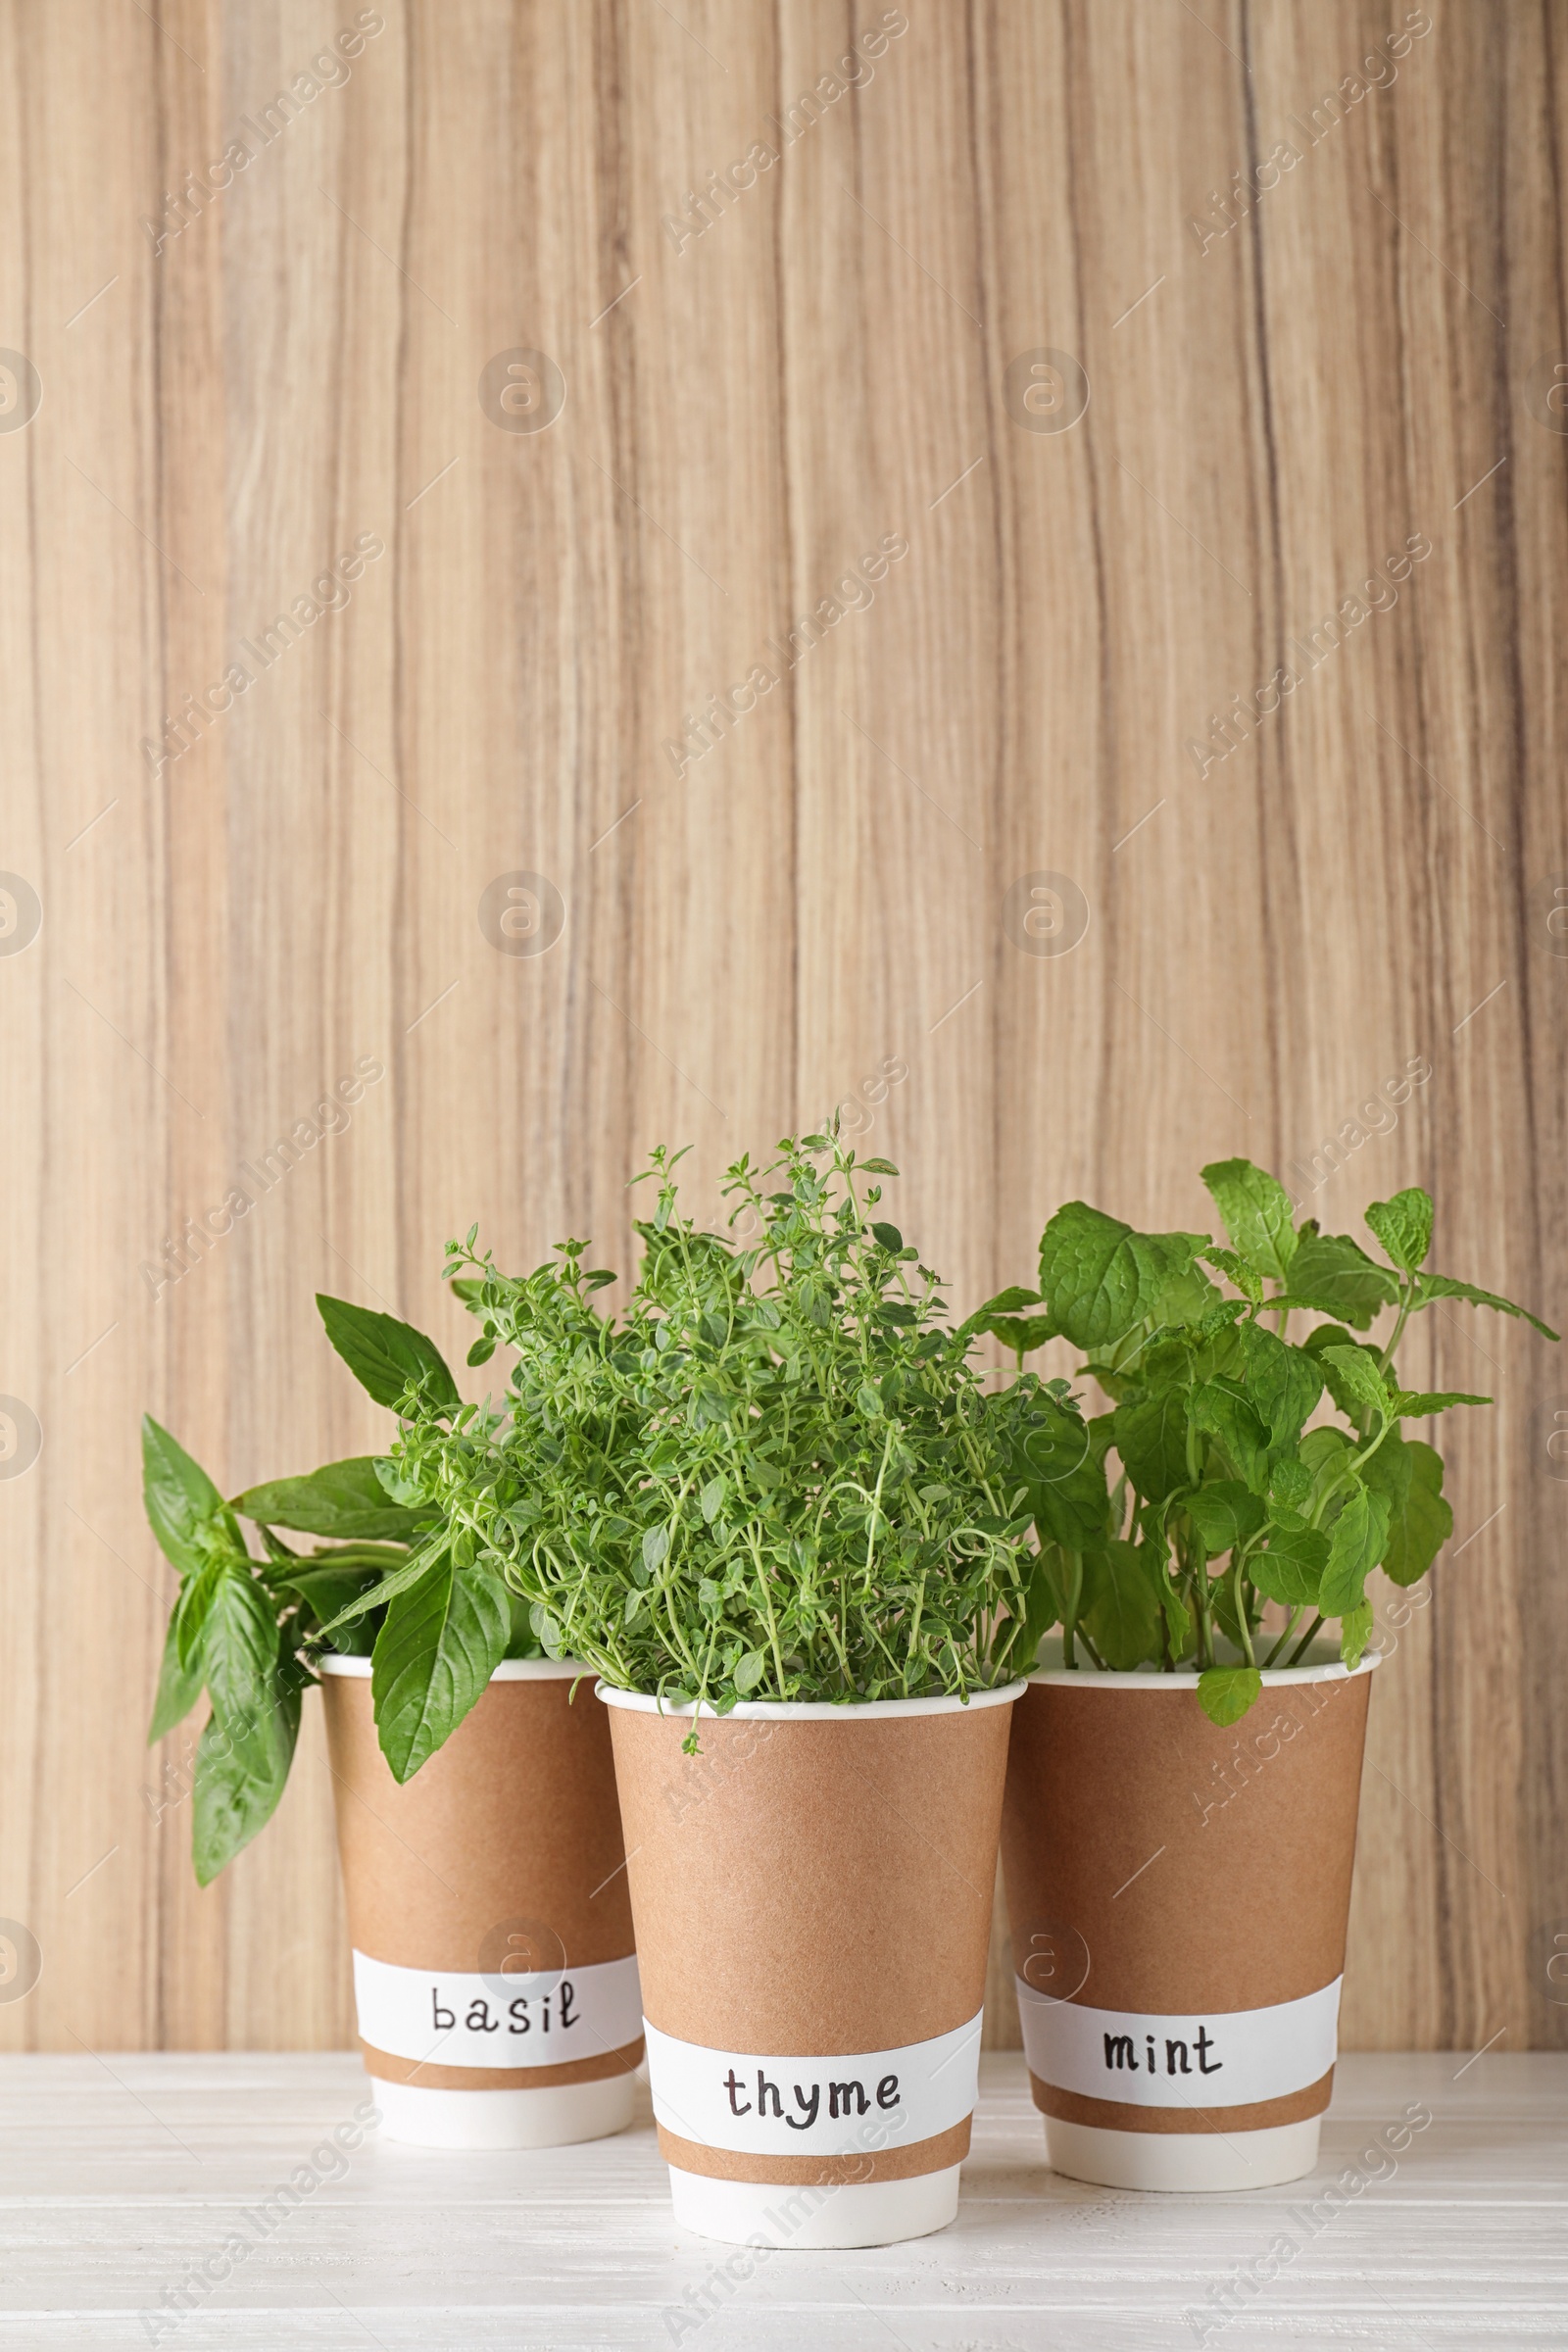 Photo of Seedlings of different herbs in paper cups with name labels on white table near wooden wall. Space for text